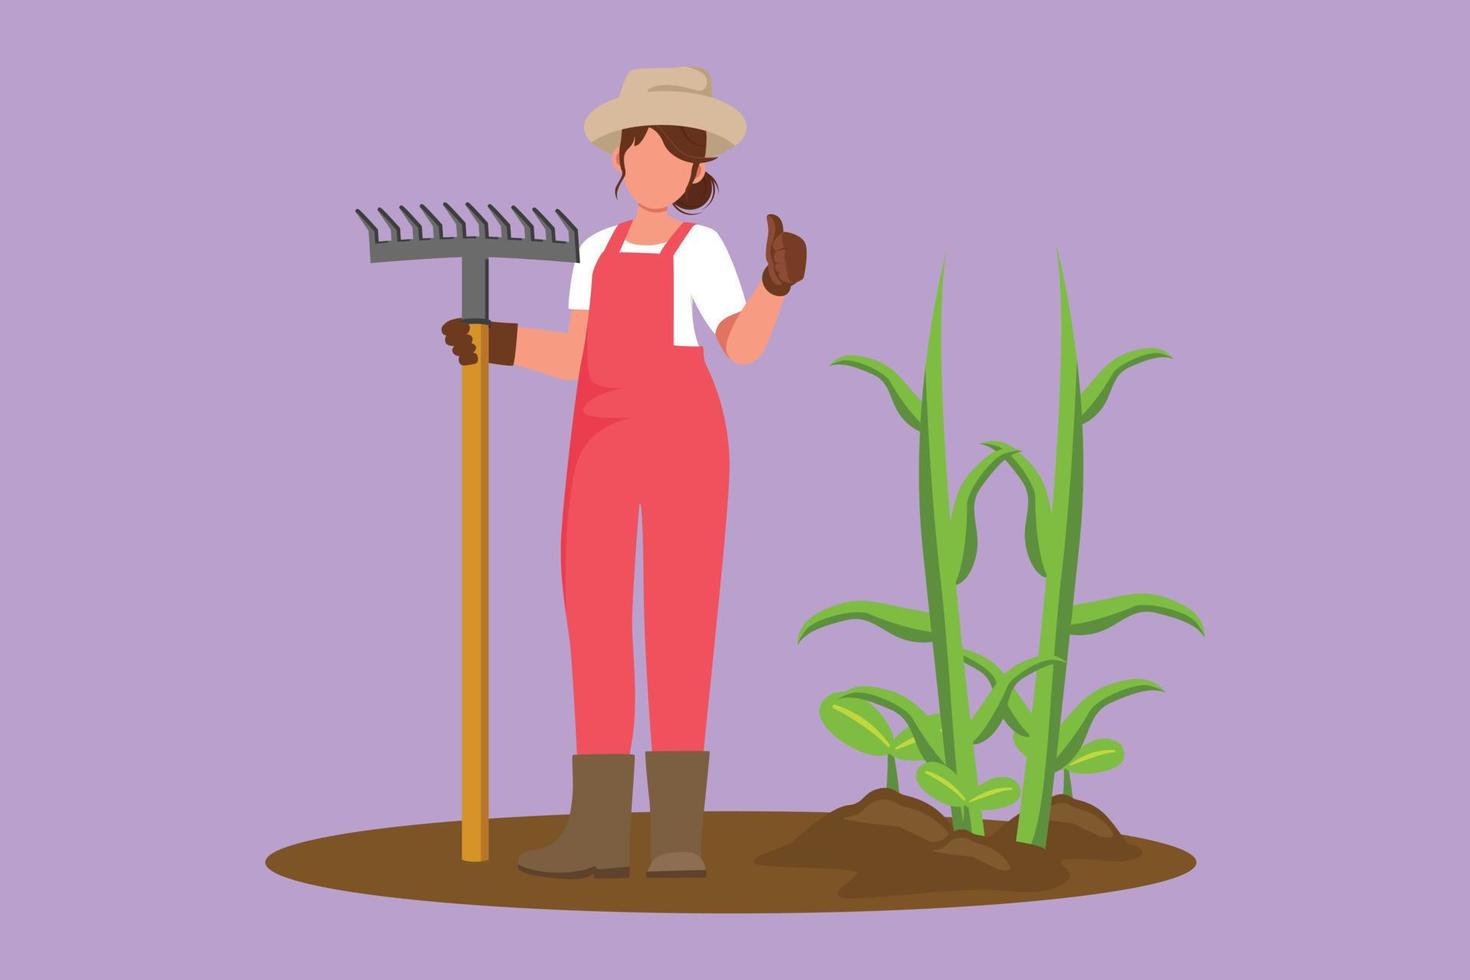 Graphic flat design drawing female farmer standing with thumbs up gesture, wearing straw hat and carrying rake to plant crops on farmland. Rural worker agricultural. Cartoon style vector illustration